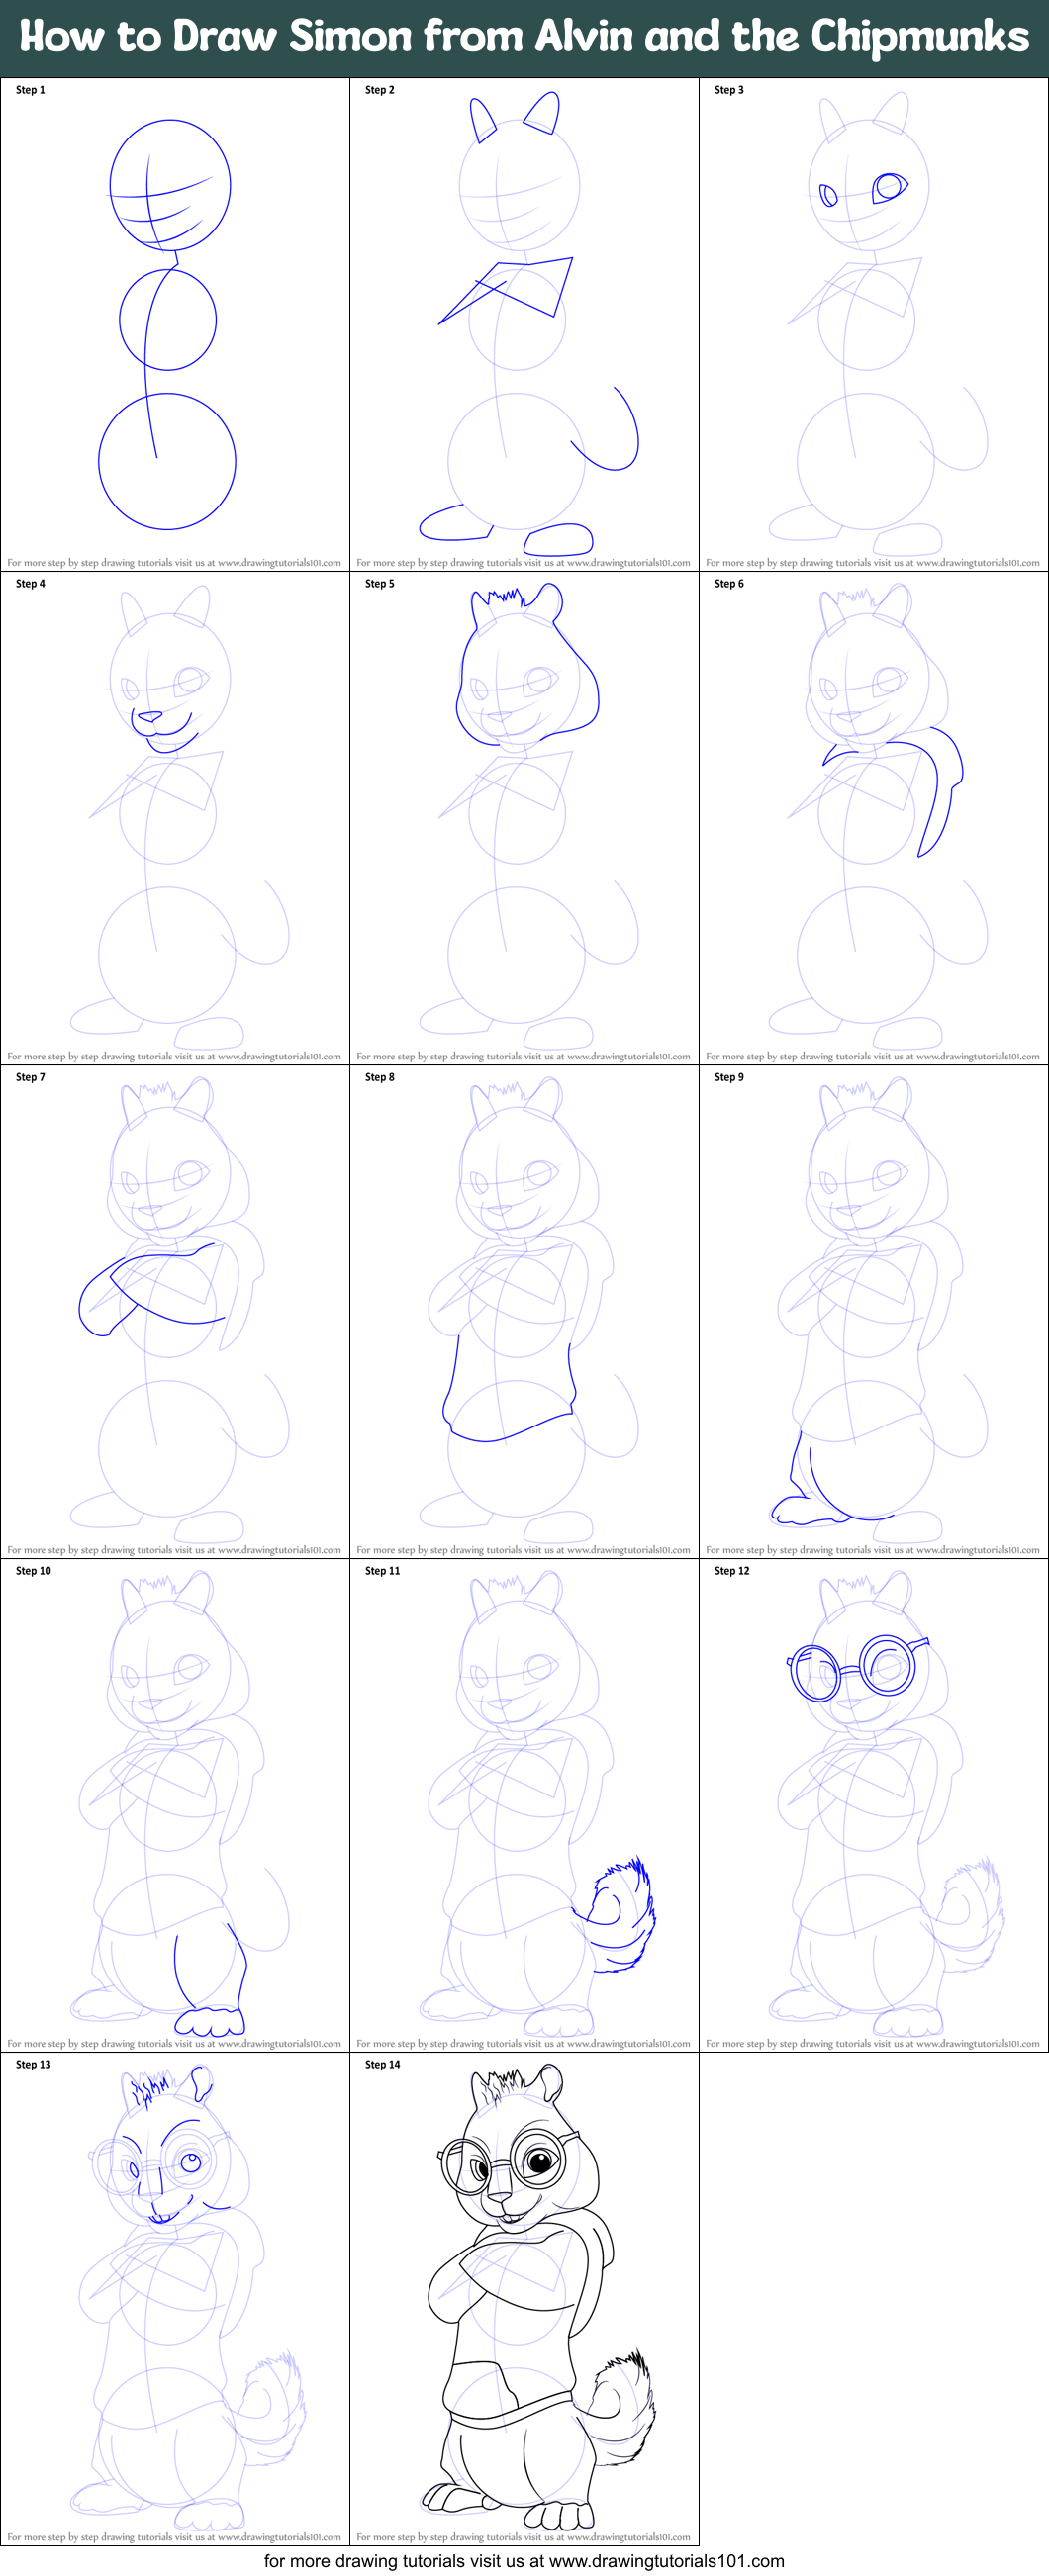 How to Draw Simon from Alvin and the Chipmunks (Alvin and the Chipmunks ...